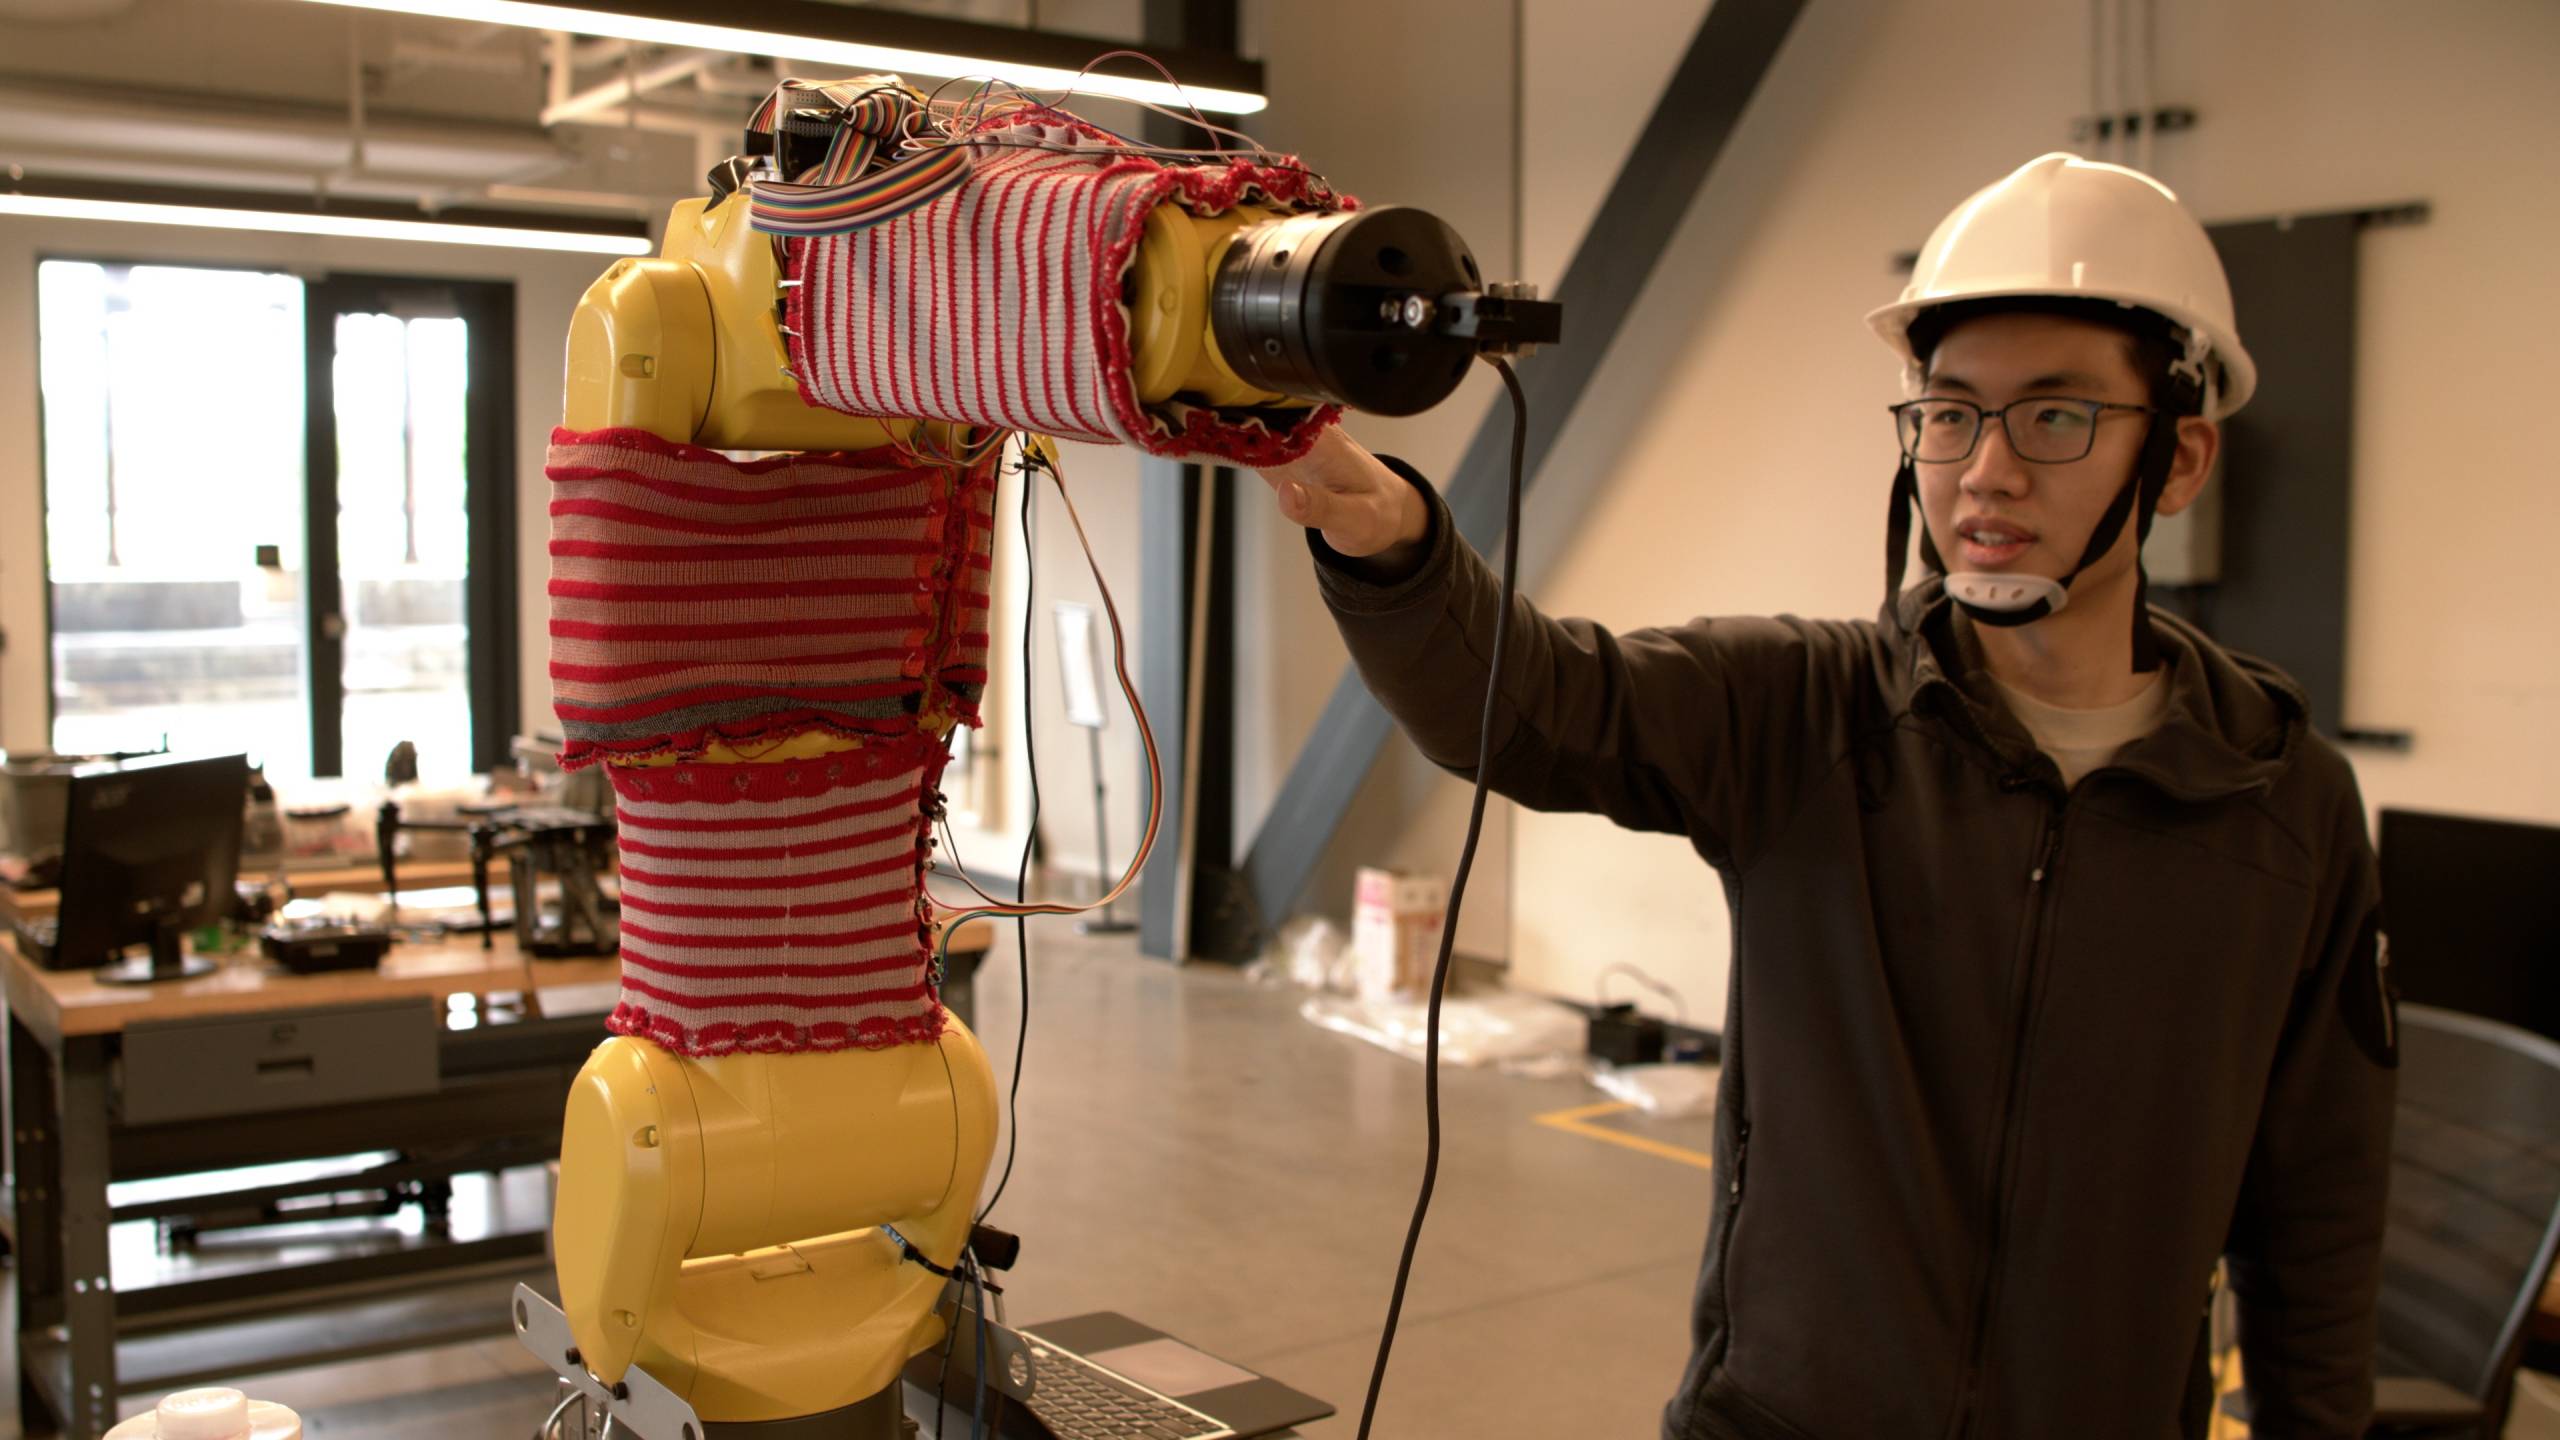 Image for Sweater-Wrapped Robots Can Feel and React to Human Touch